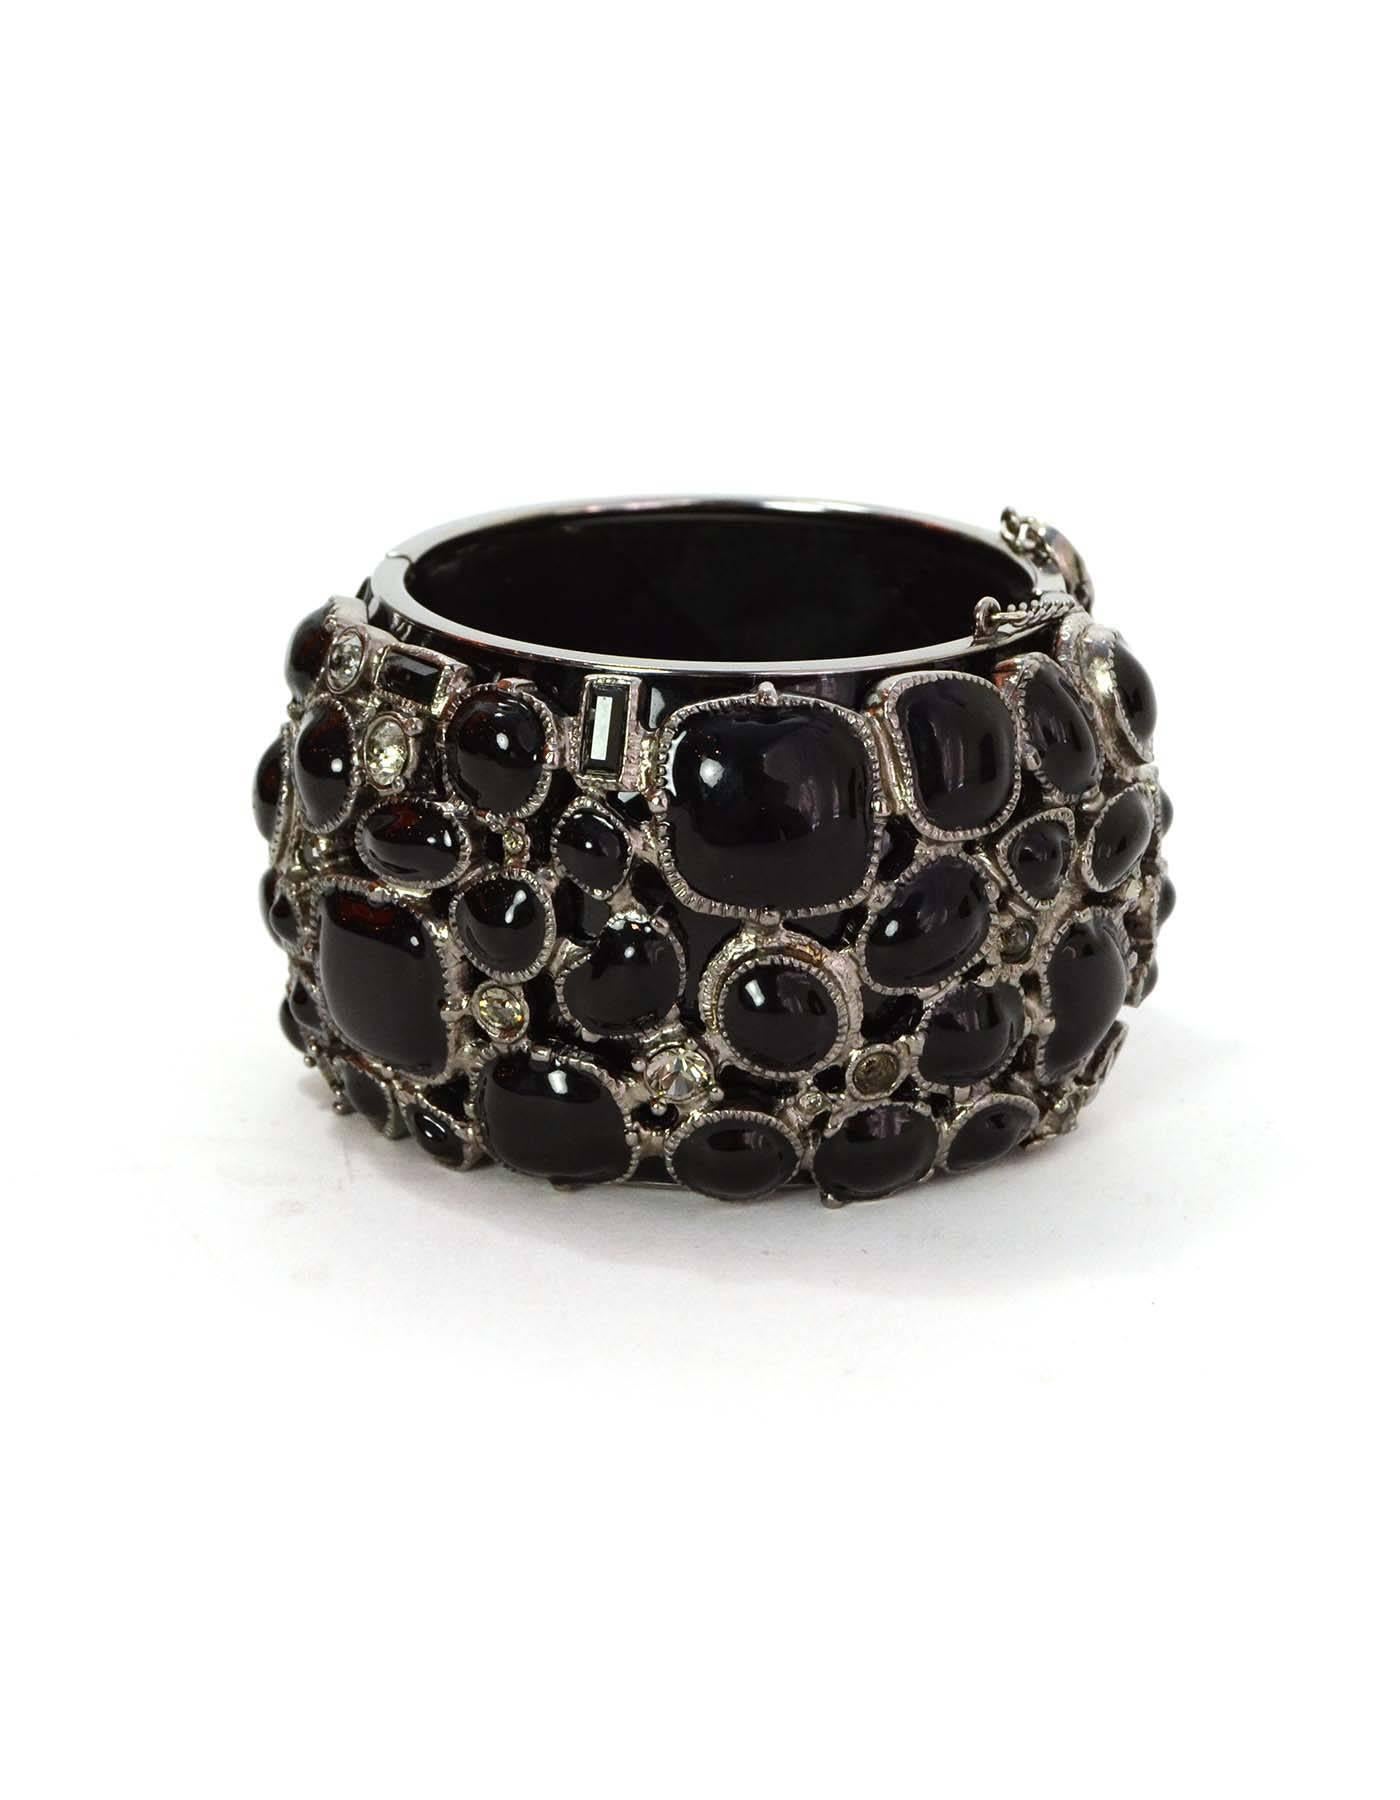 Chanel Black Enamel & Crystal Cuff Bracelet
Features large CC logo encrusted on center.  Front of bracelet can be worn as enamel cluster, or with CC visible.

Made In: France
Year of Production: 2009
Color: Black, silvertone and